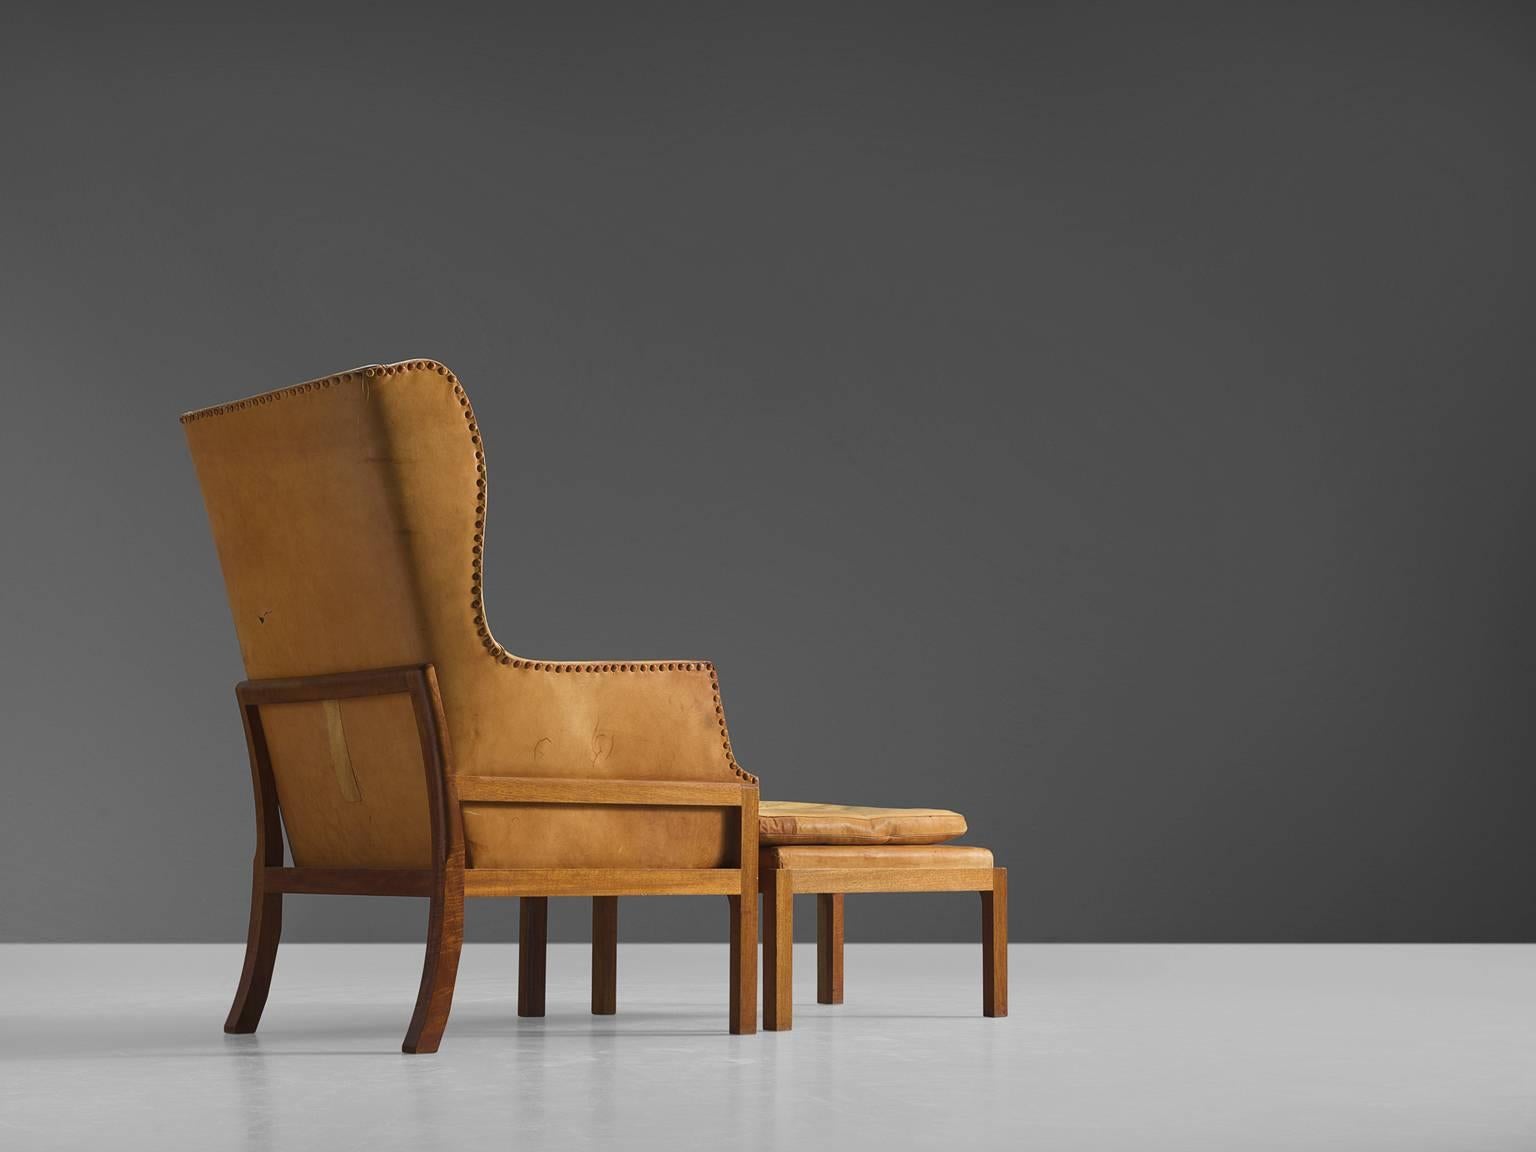 Wingback chair and ottoman model MK50, in mahogany and leather, by Mogens Koch for Rud Rasmussen, Denmark, 1936.

Elegant and comfortable armchair in mahogany and leather by Mogens Koch. This lounge chair was designed with high attention to